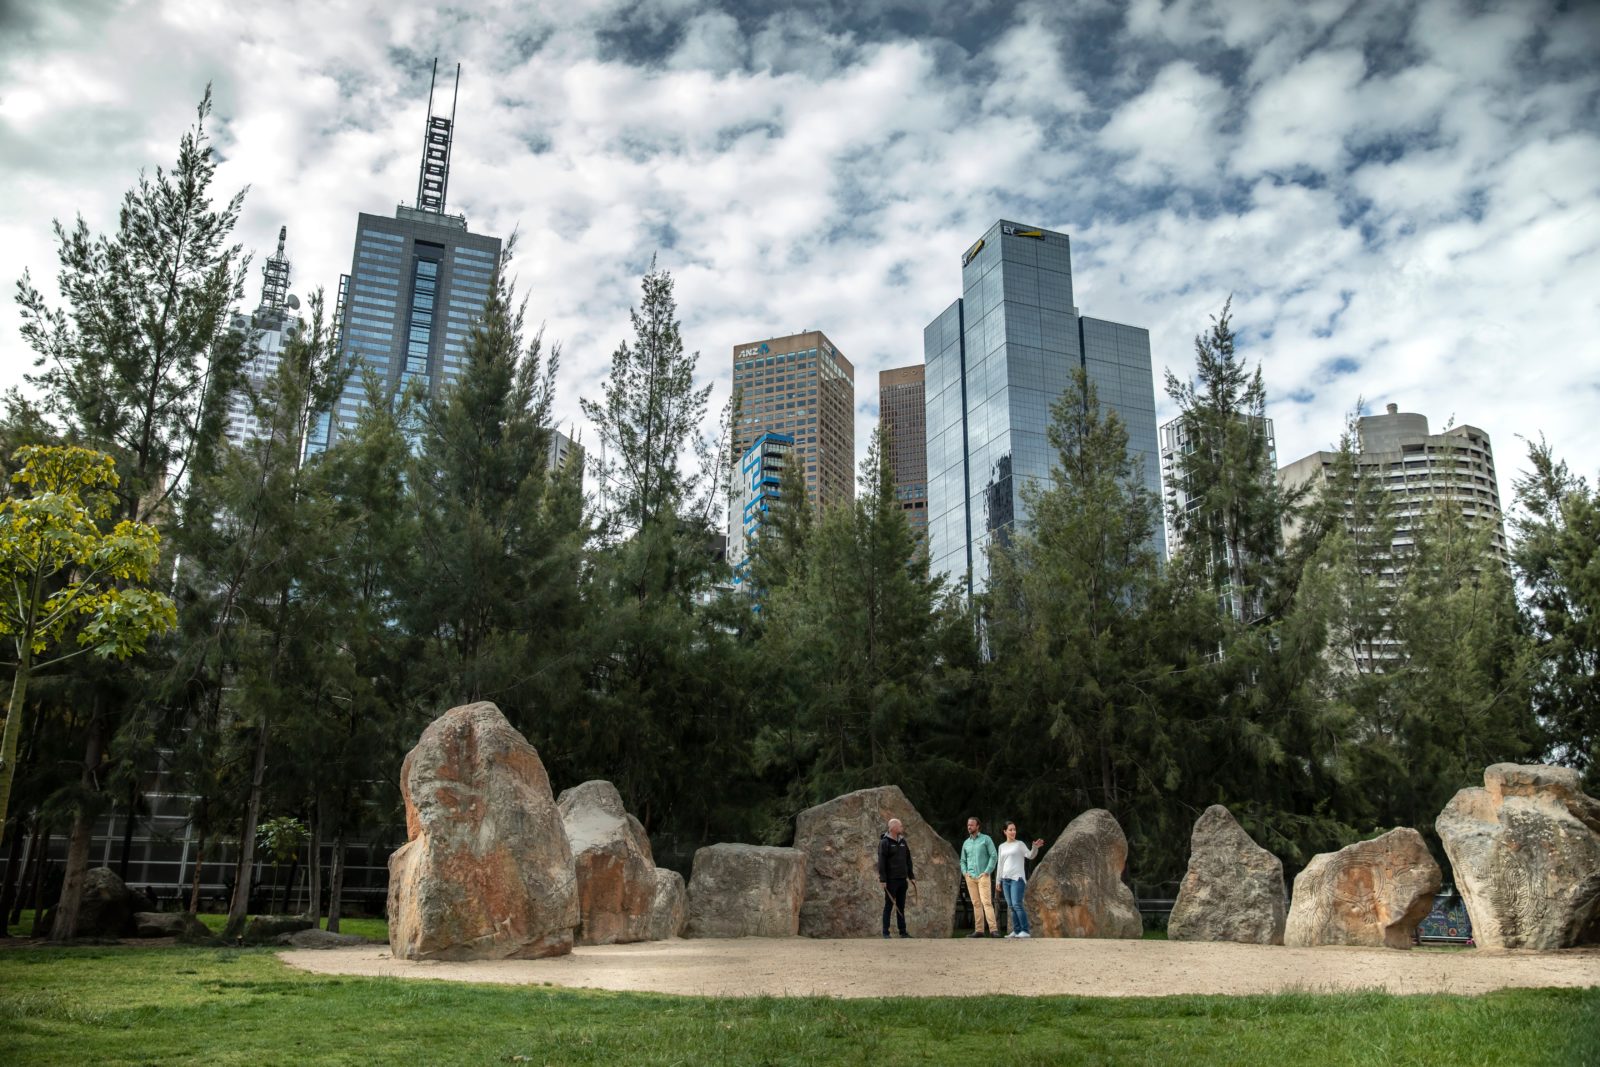 A group of people standing in a park with large rocks and trees.